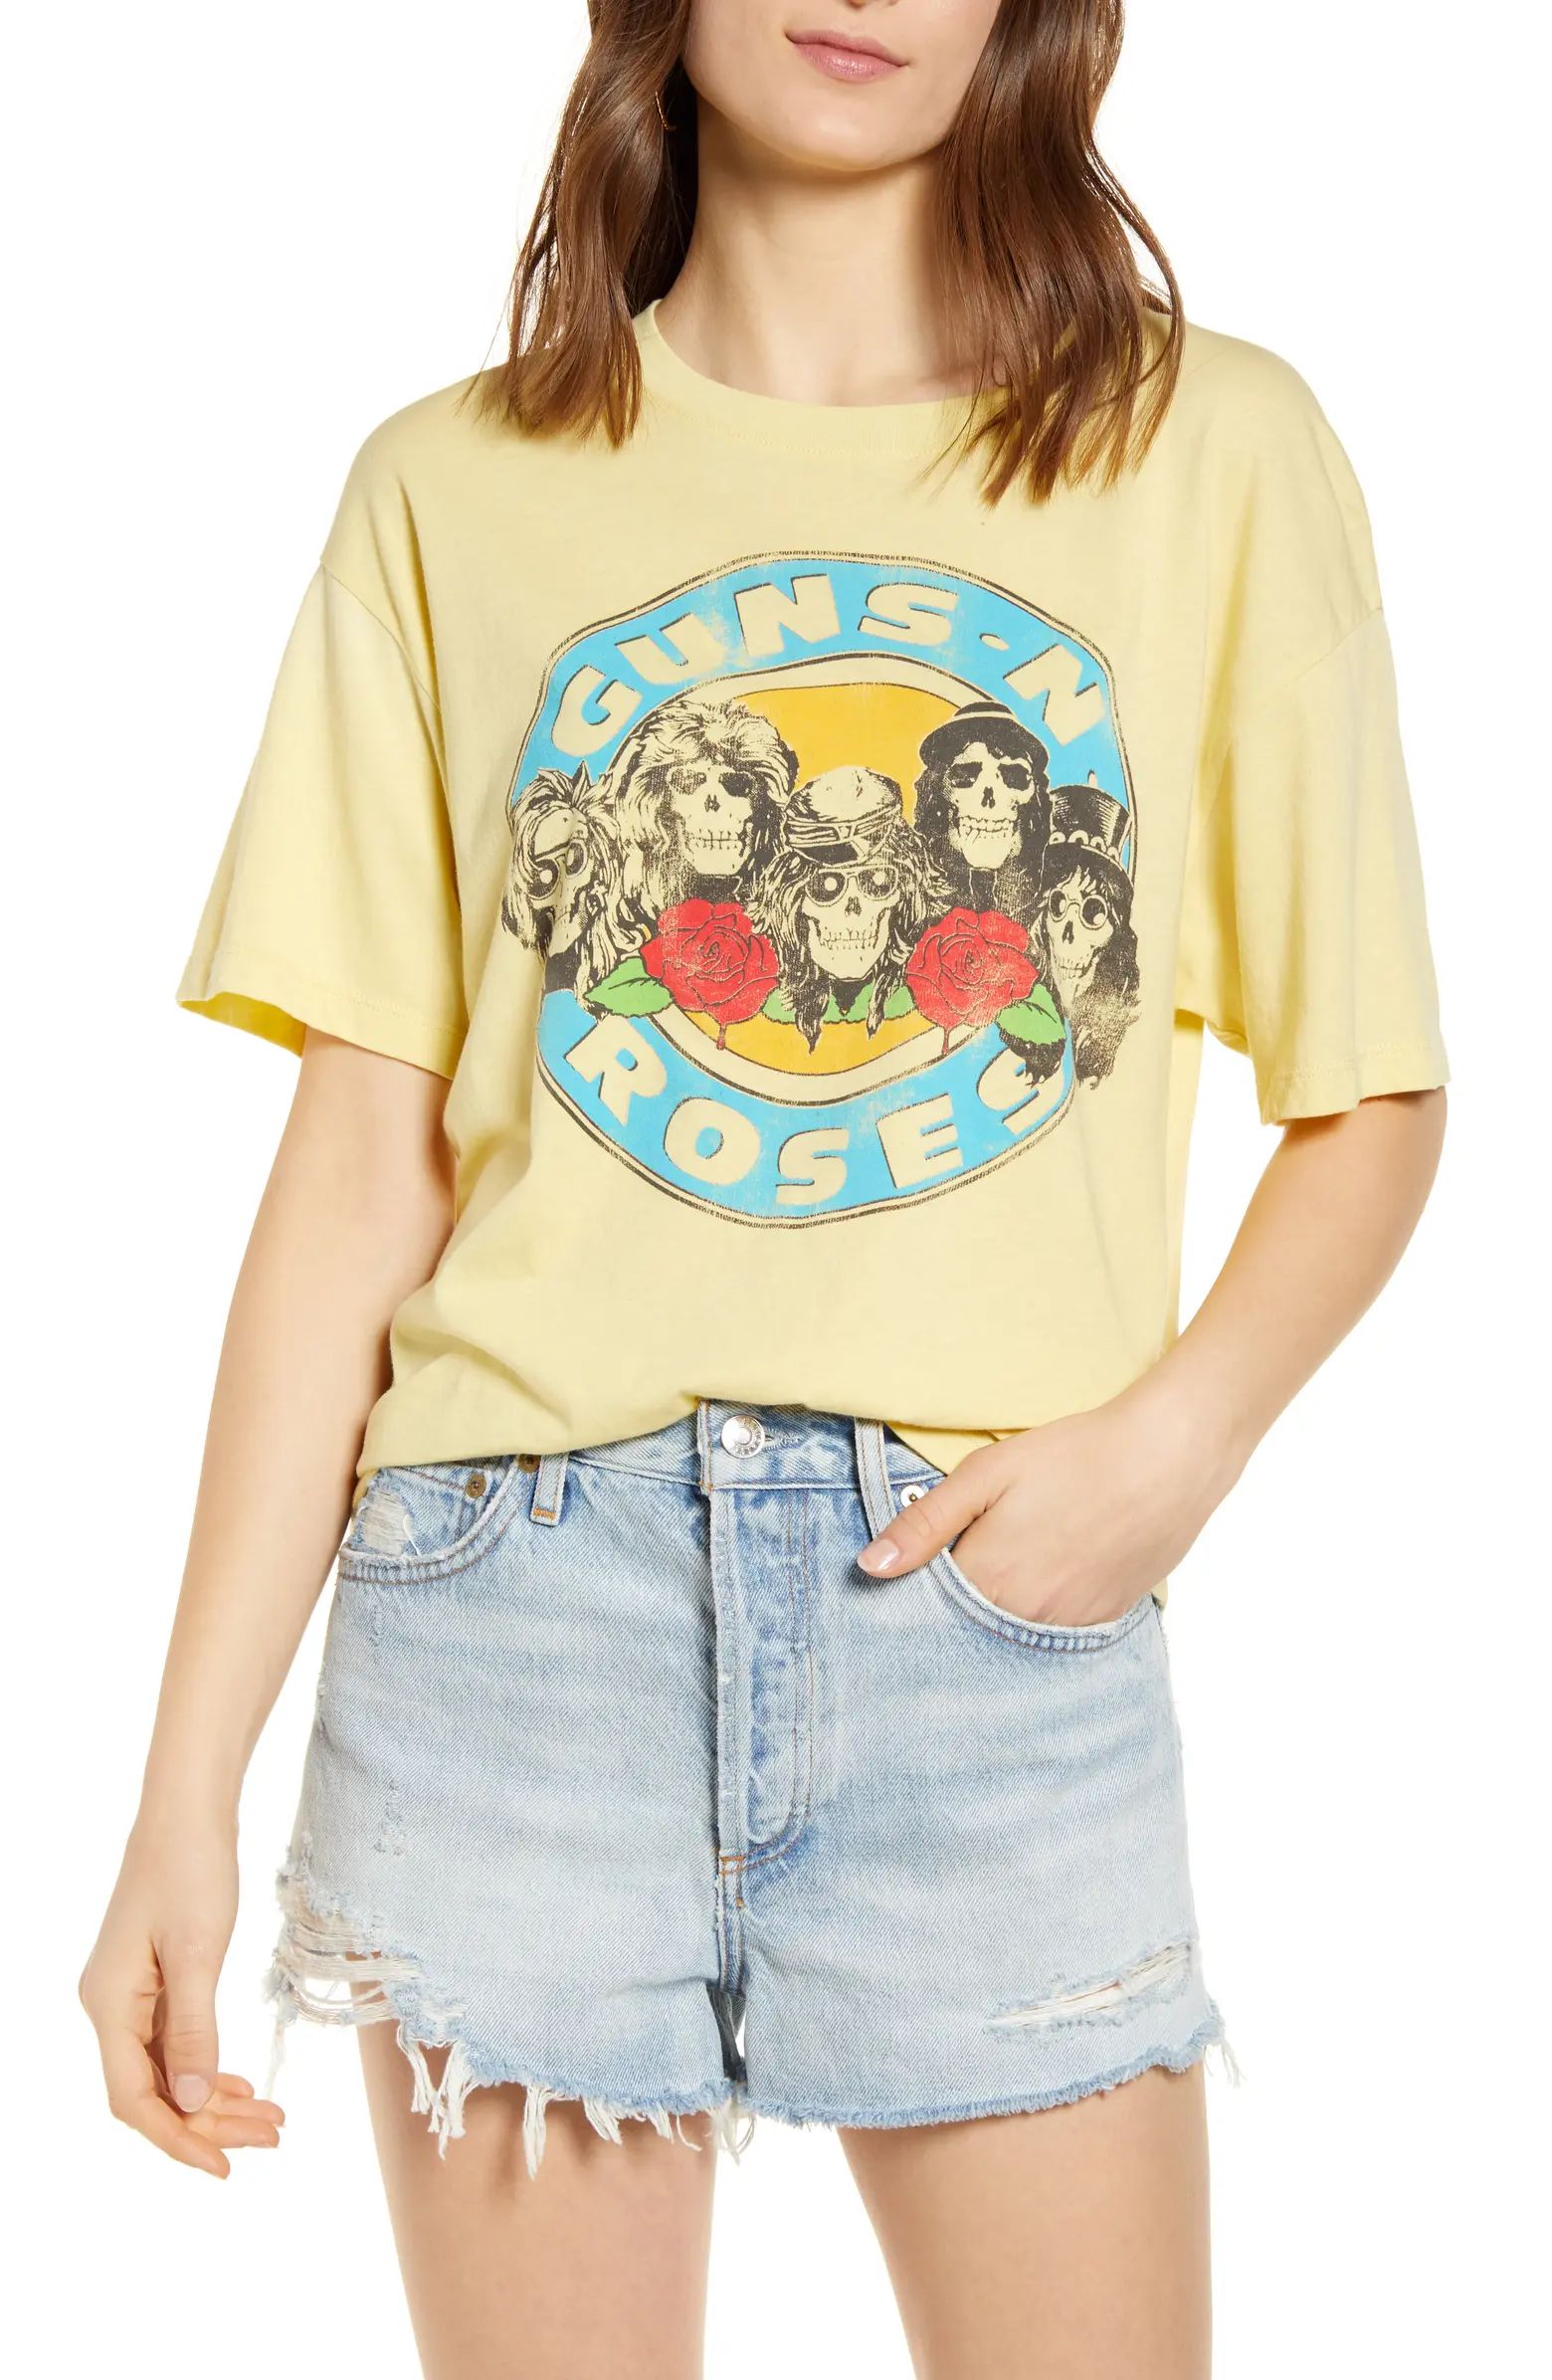 Guns N' Roses Welcome to the Jungle Graphic Tee | Nordstrom